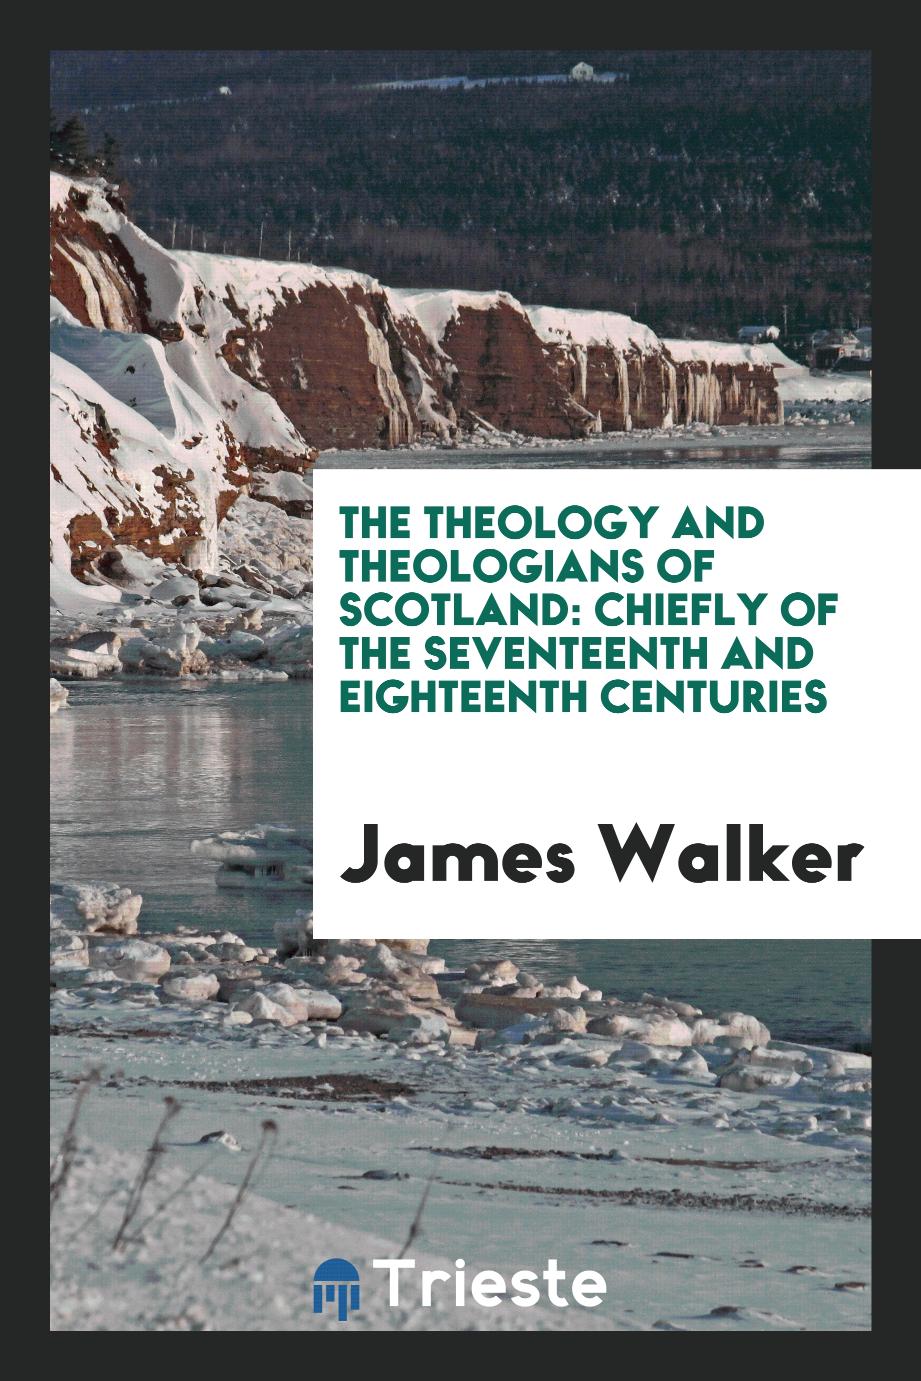 The theology and theologians of Scotland: chiefly of the seventeenth and eighteenth centuries